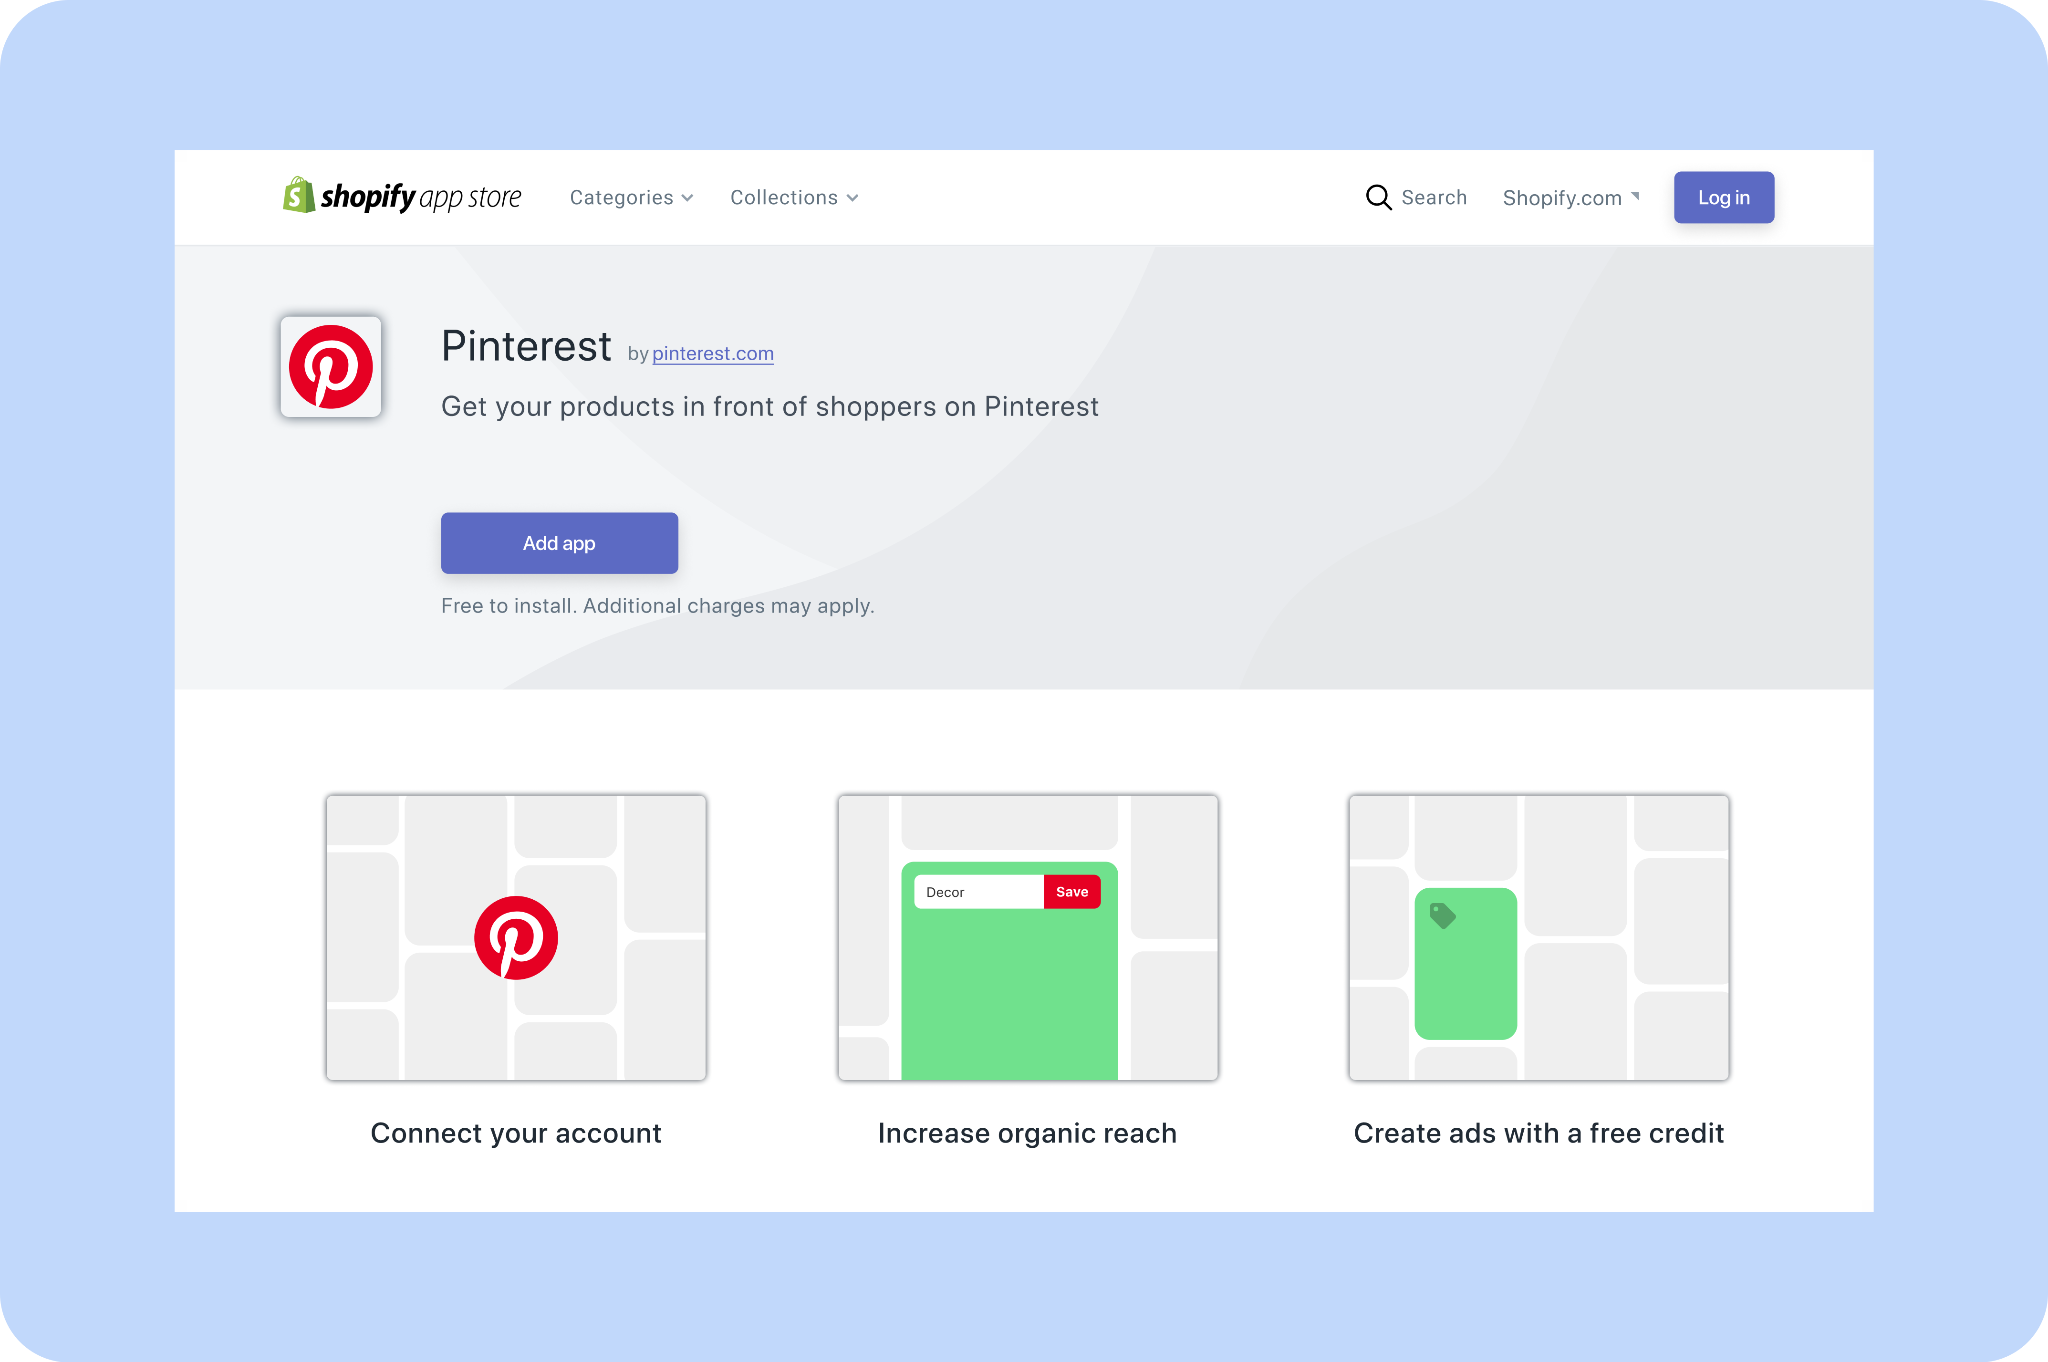 Stylized image of the Pinterest app on the Shopify app store